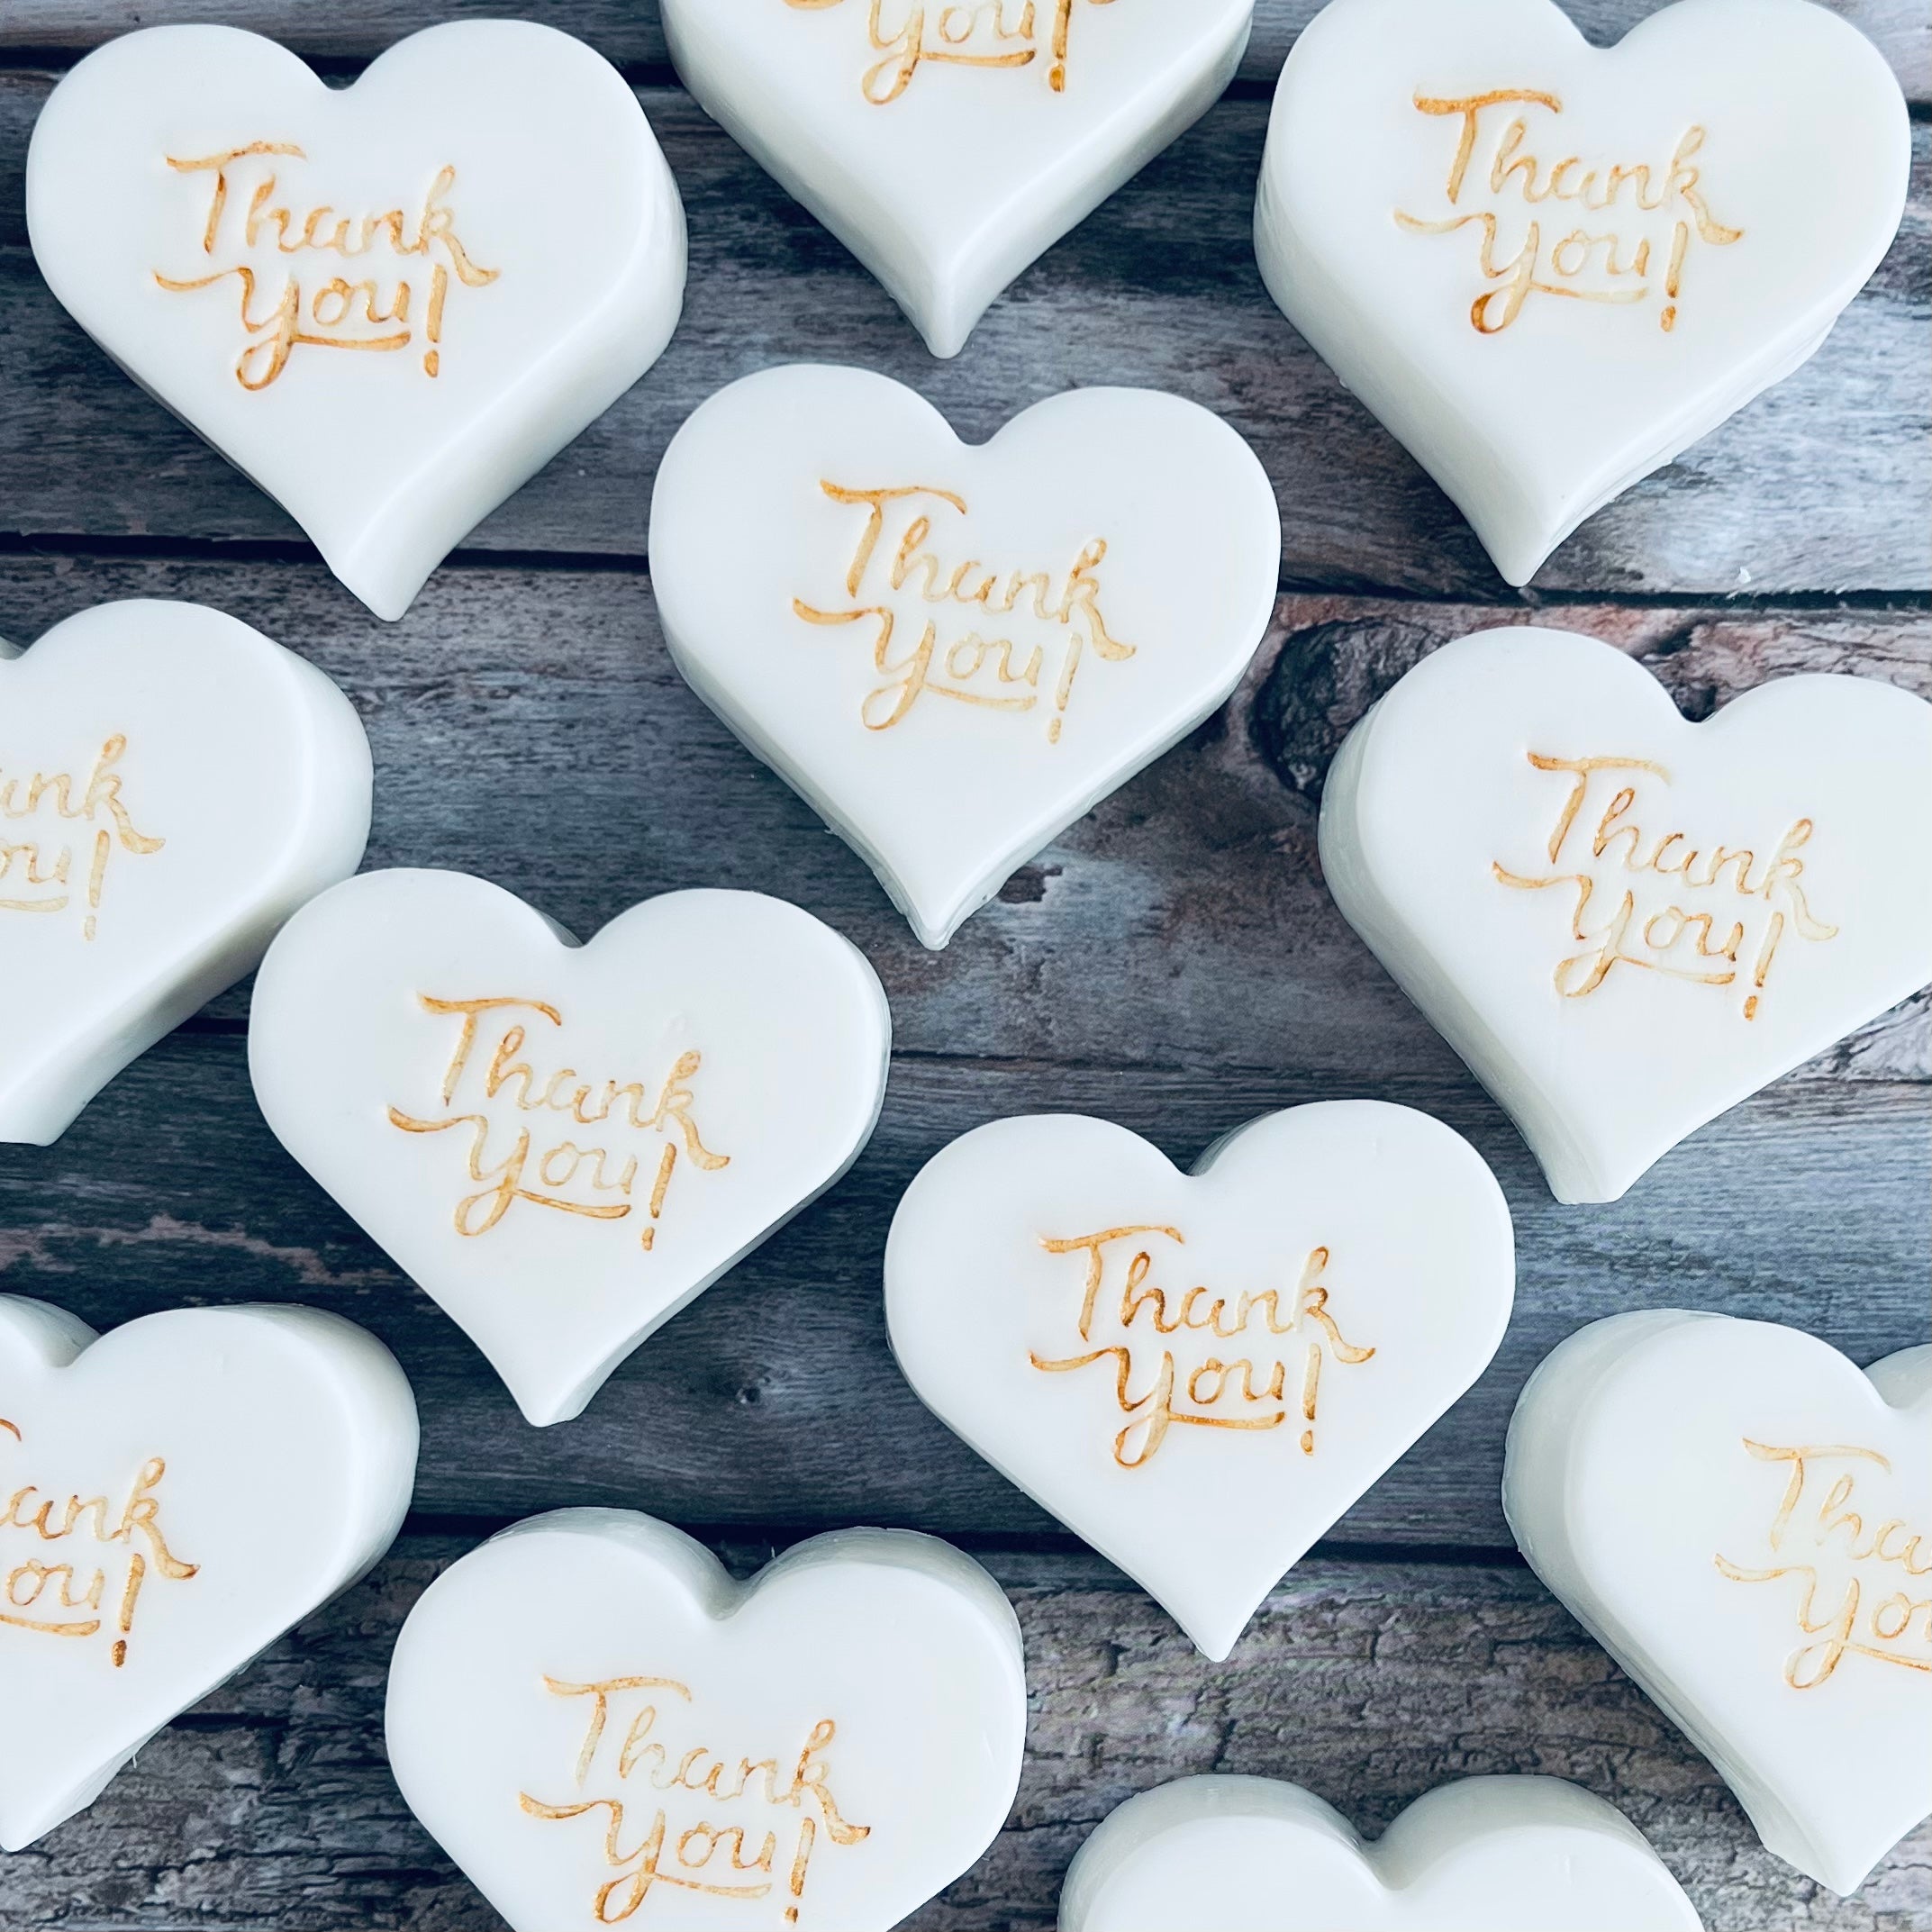 “Thank you” Heart Soap